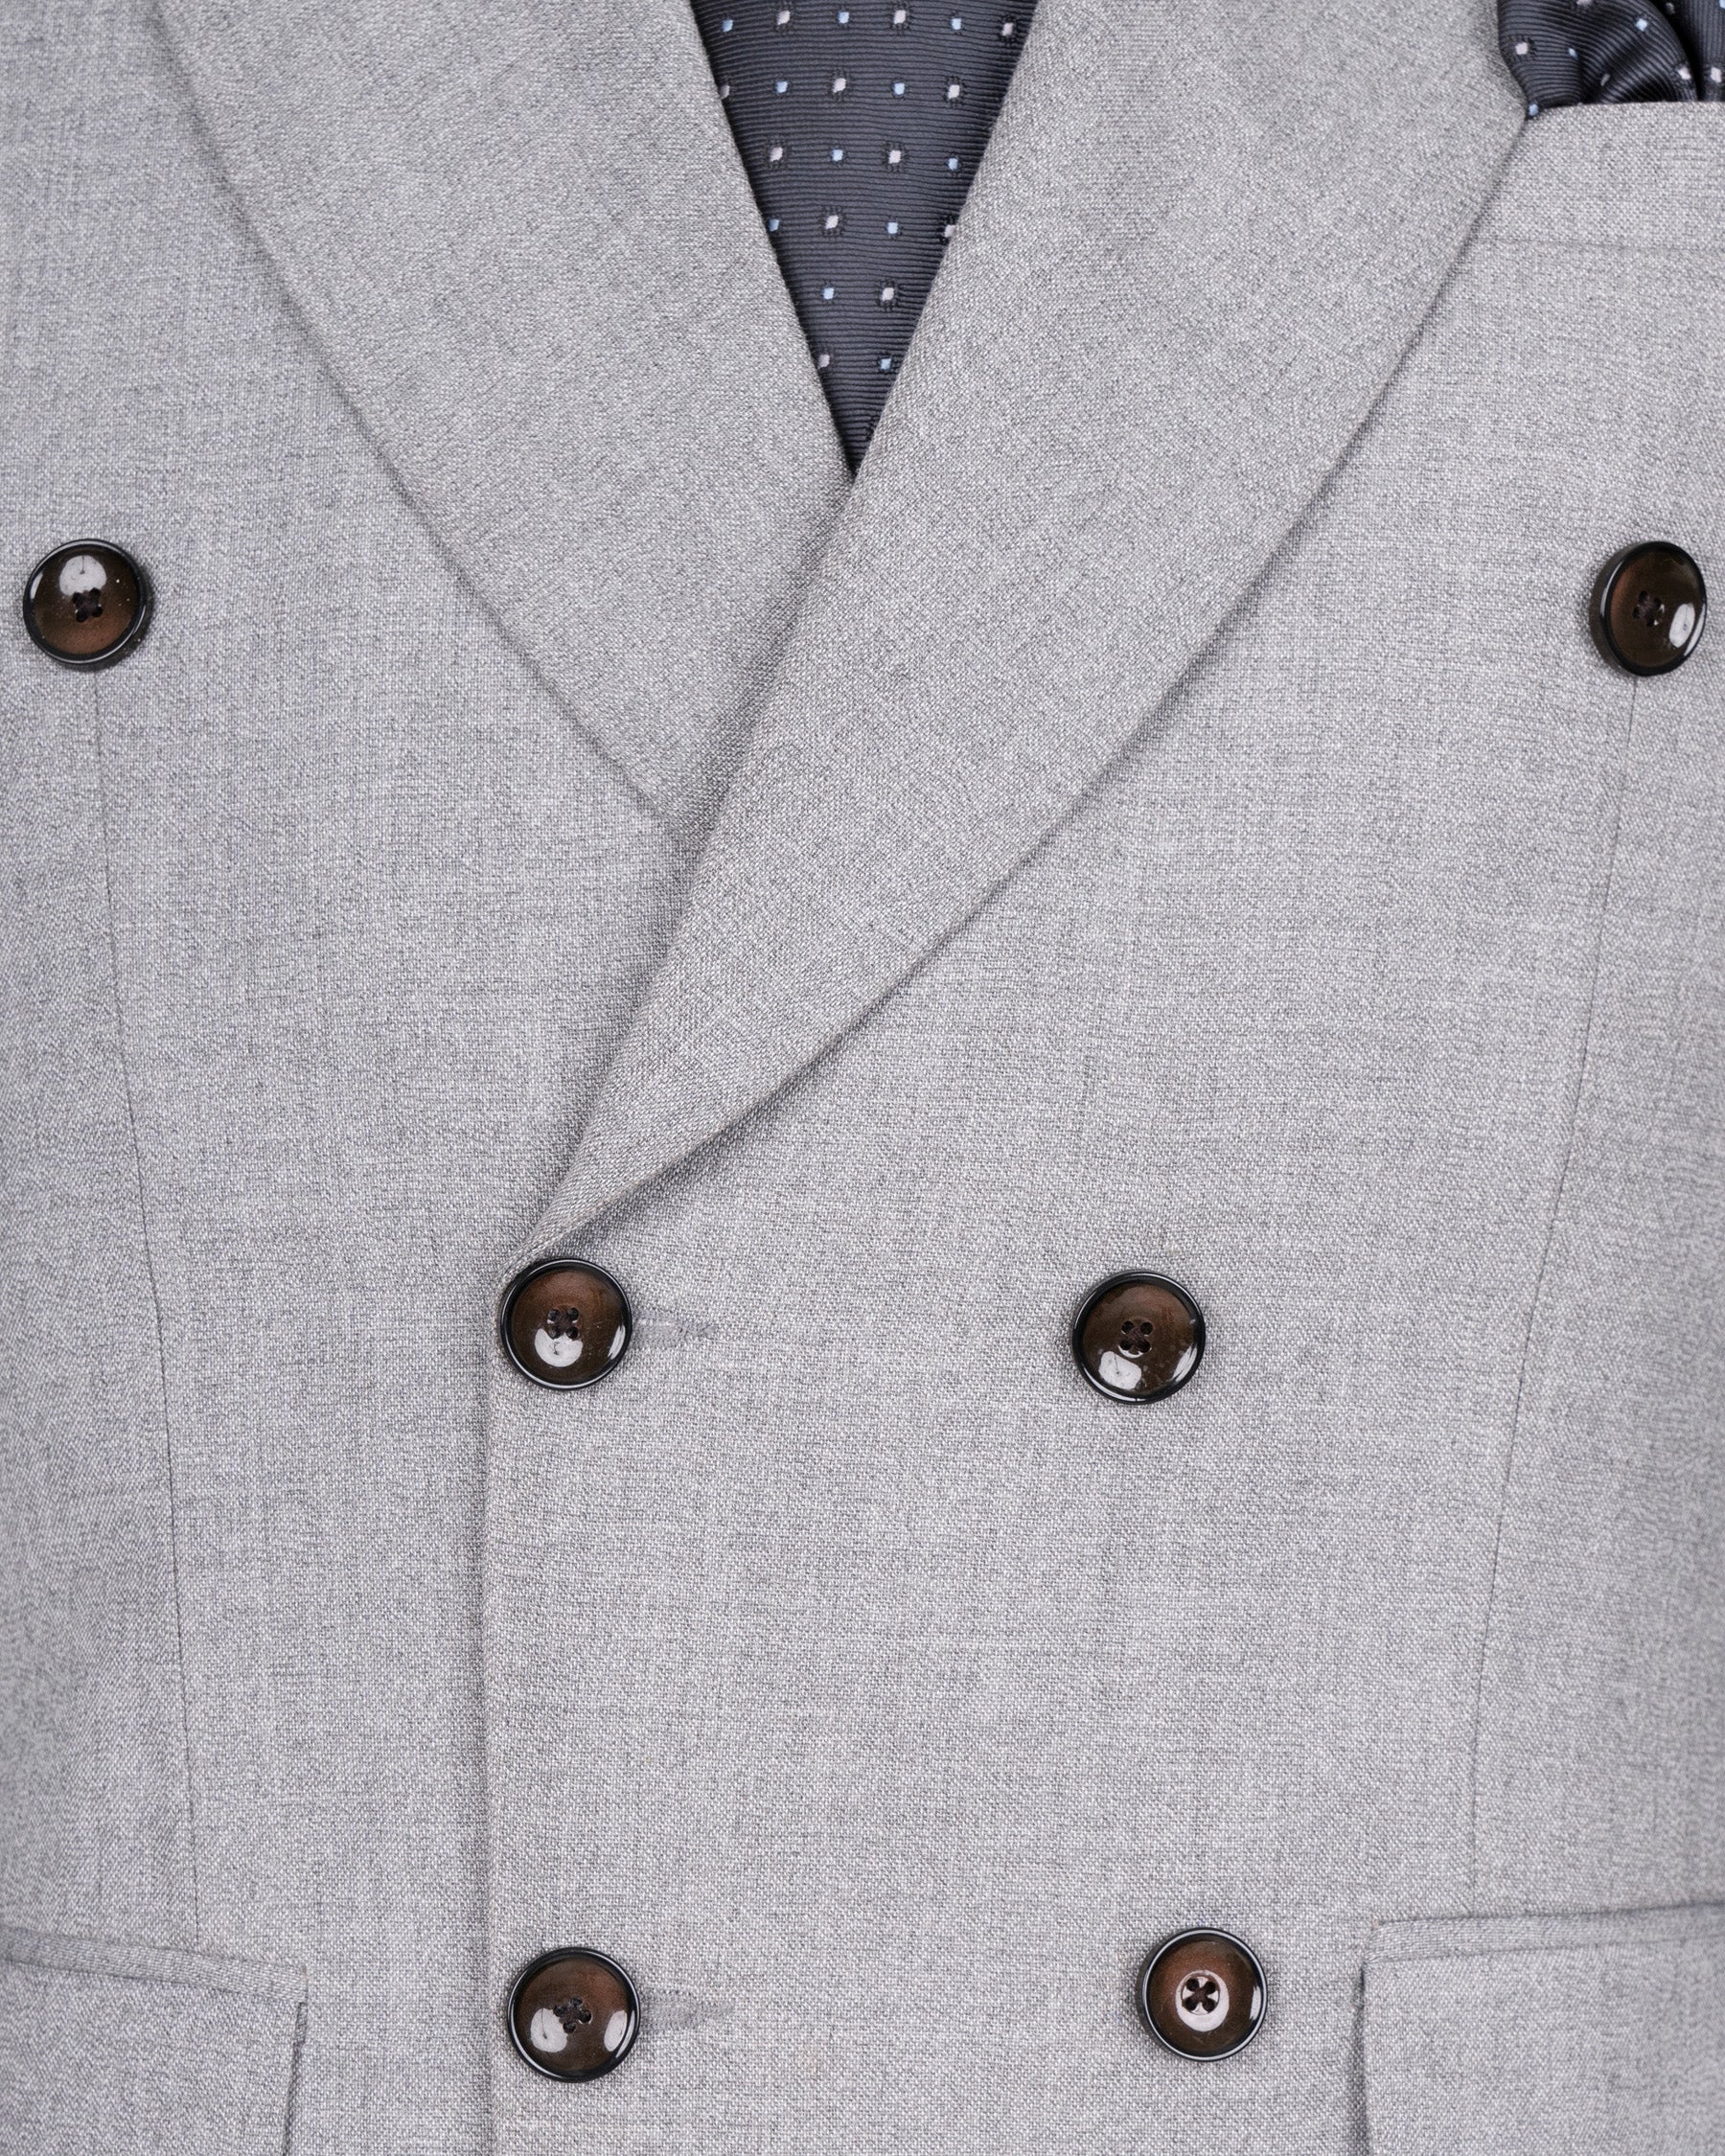 Silver Sand Grey Double-Breasted Wool Rich Suit ST1529-DB-36, ST1529-DB-38, ST1529-DB-40, ST1529-DB-42, ST1529-DB-44, ST1529-DB-46, ST1529-DB-48, ST1529-DB-50, ST1529-DB-52, ST1529-DB-54, ST1529-DB-56, ST1529-DB-58, ST1529-DB-60